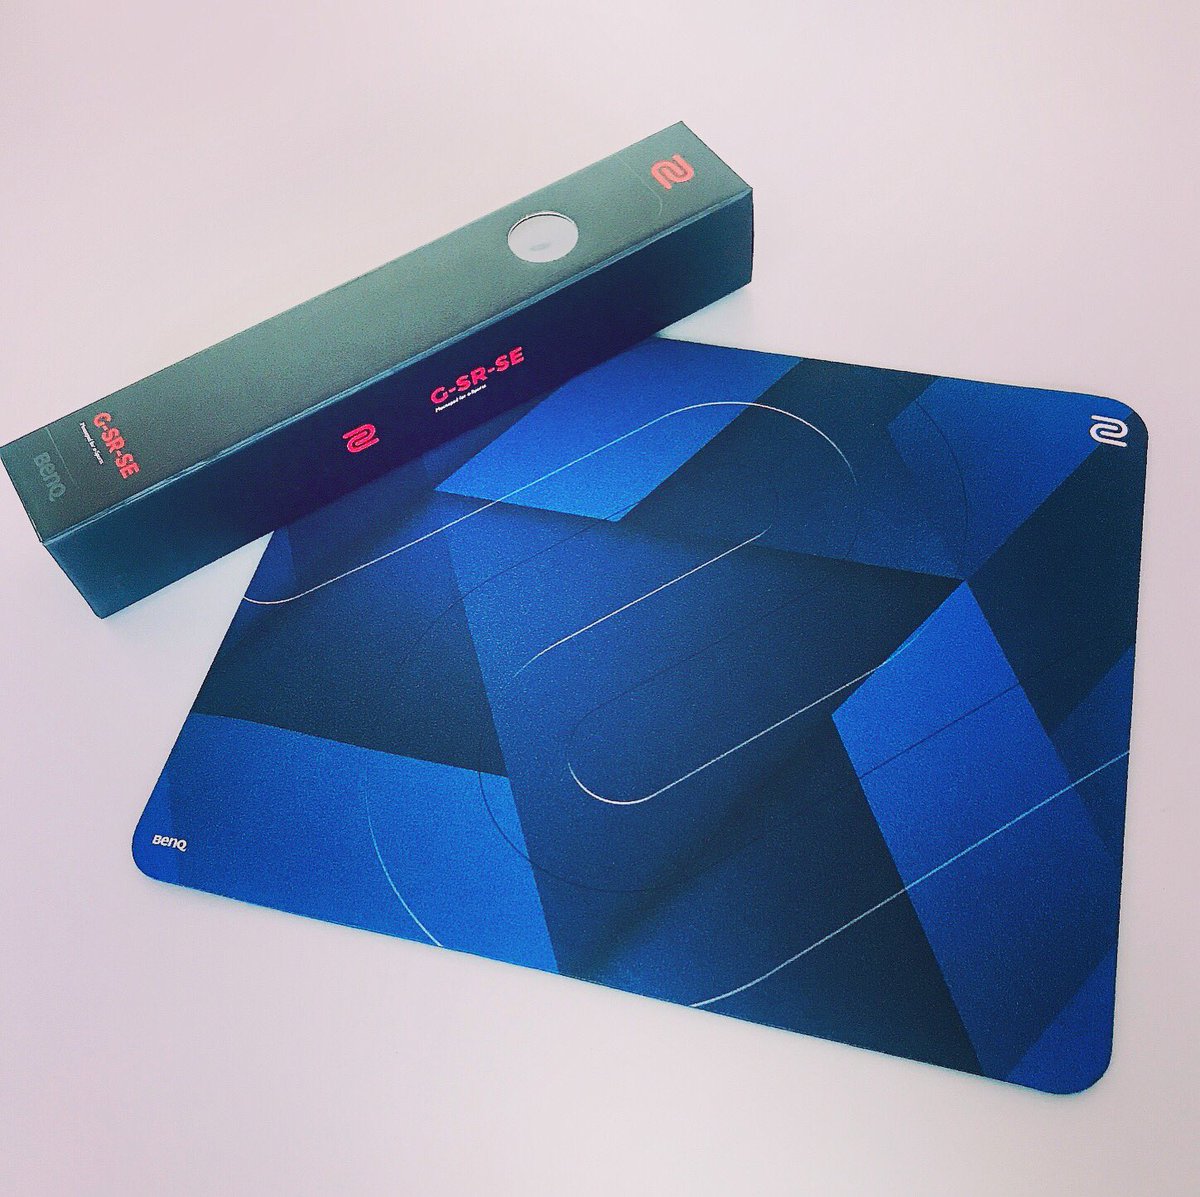 Addice Inc Zowie G Sr Se Deep Blue Is Finally Here This Is A Limited First Run So Get Yours Now Before They Re Out Of Stock T Co Ri5qng0rss T Co Xh1rjuhjys Twitter